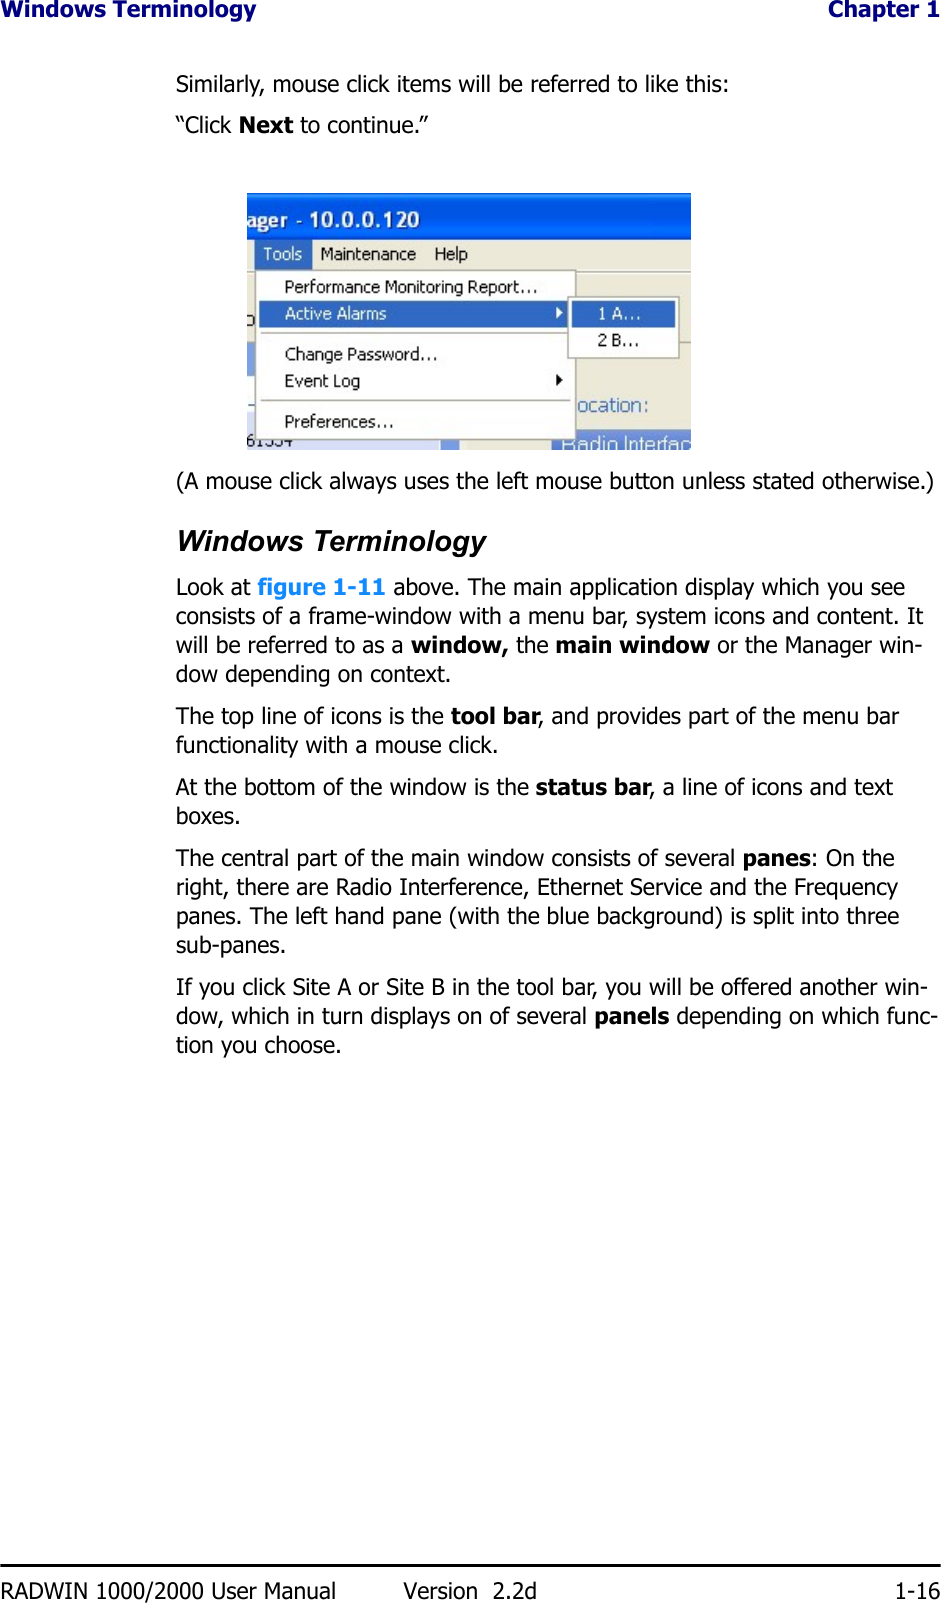 Windows Terminology  Chapter 1RADWIN 1000/2000 User Manual Version  2.2d 1-16Similarly, mouse click items will be referred to like this:“Click Next to continue.”(A mouse click always uses the left mouse button unless stated otherwise.)Windows TerminologyLook at figure 1-11 above. The main application display which you see consists of a frame-window with a menu bar, system icons and content. It will be referred to as a window, the main window or the Manager win-dow depending on context.The top line of icons is the tool bar, and provides part of the menu bar functionality with a mouse click.At the bottom of the window is the status bar, a line of icons and text boxes.The central part of the main window consists of several panes: On the right, there are Radio Interference, Ethernet Service and the Frequency panes. The left hand pane (with the blue background) is split into three sub-panes.If you click Site A or Site B in the tool bar, you will be offered another win-dow, which in turn displays on of several panels depending on which func-tion you choose.